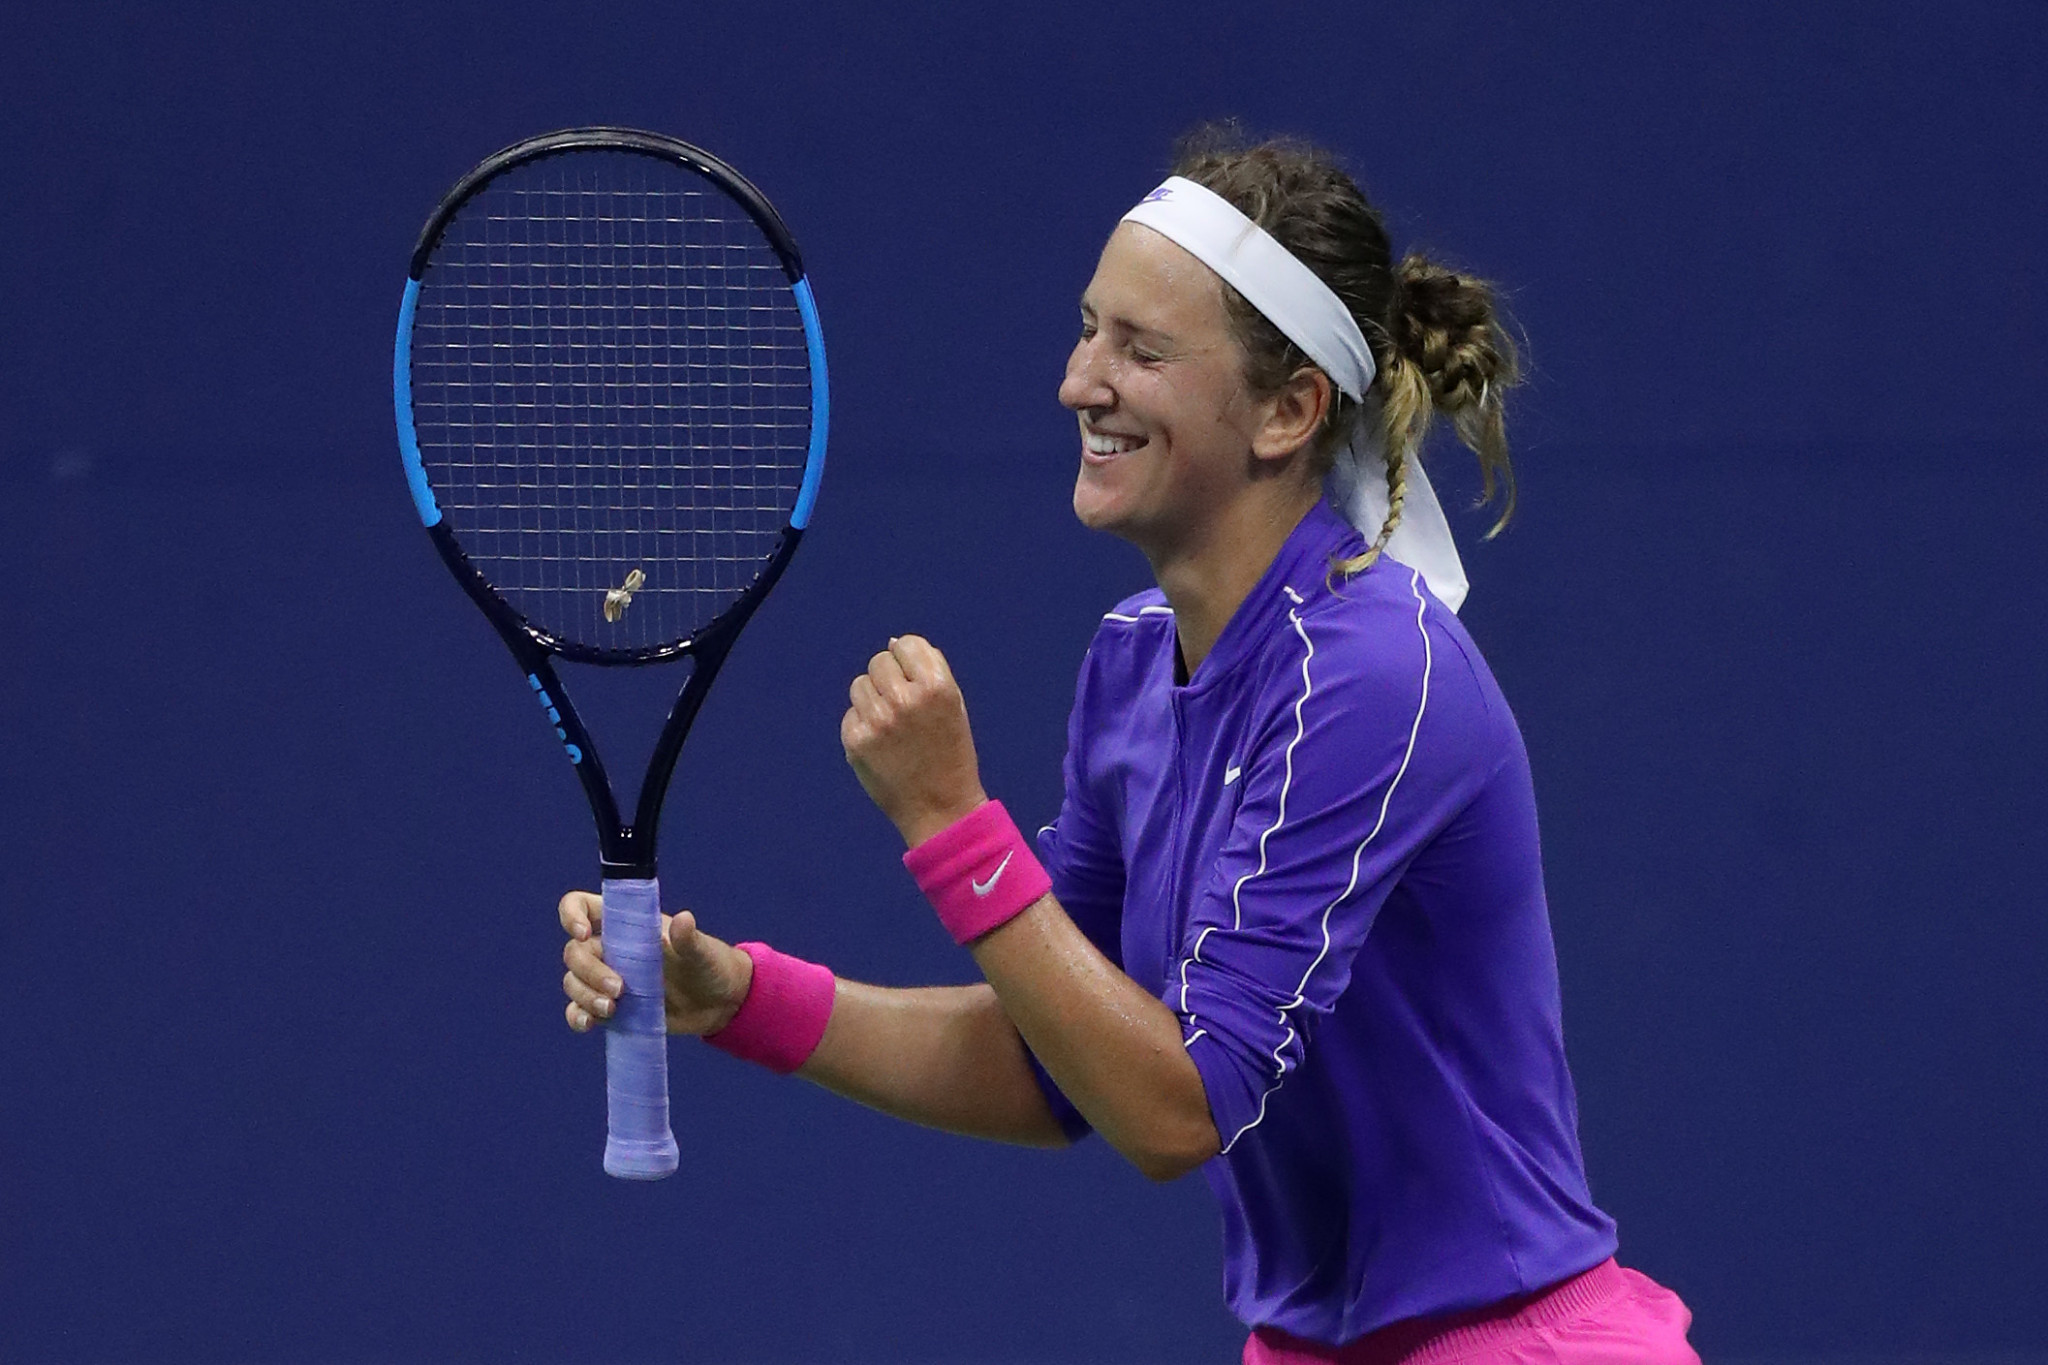 Victoria Azarenka dropped just one game en route to the US Open semi-finals ©Getty Images